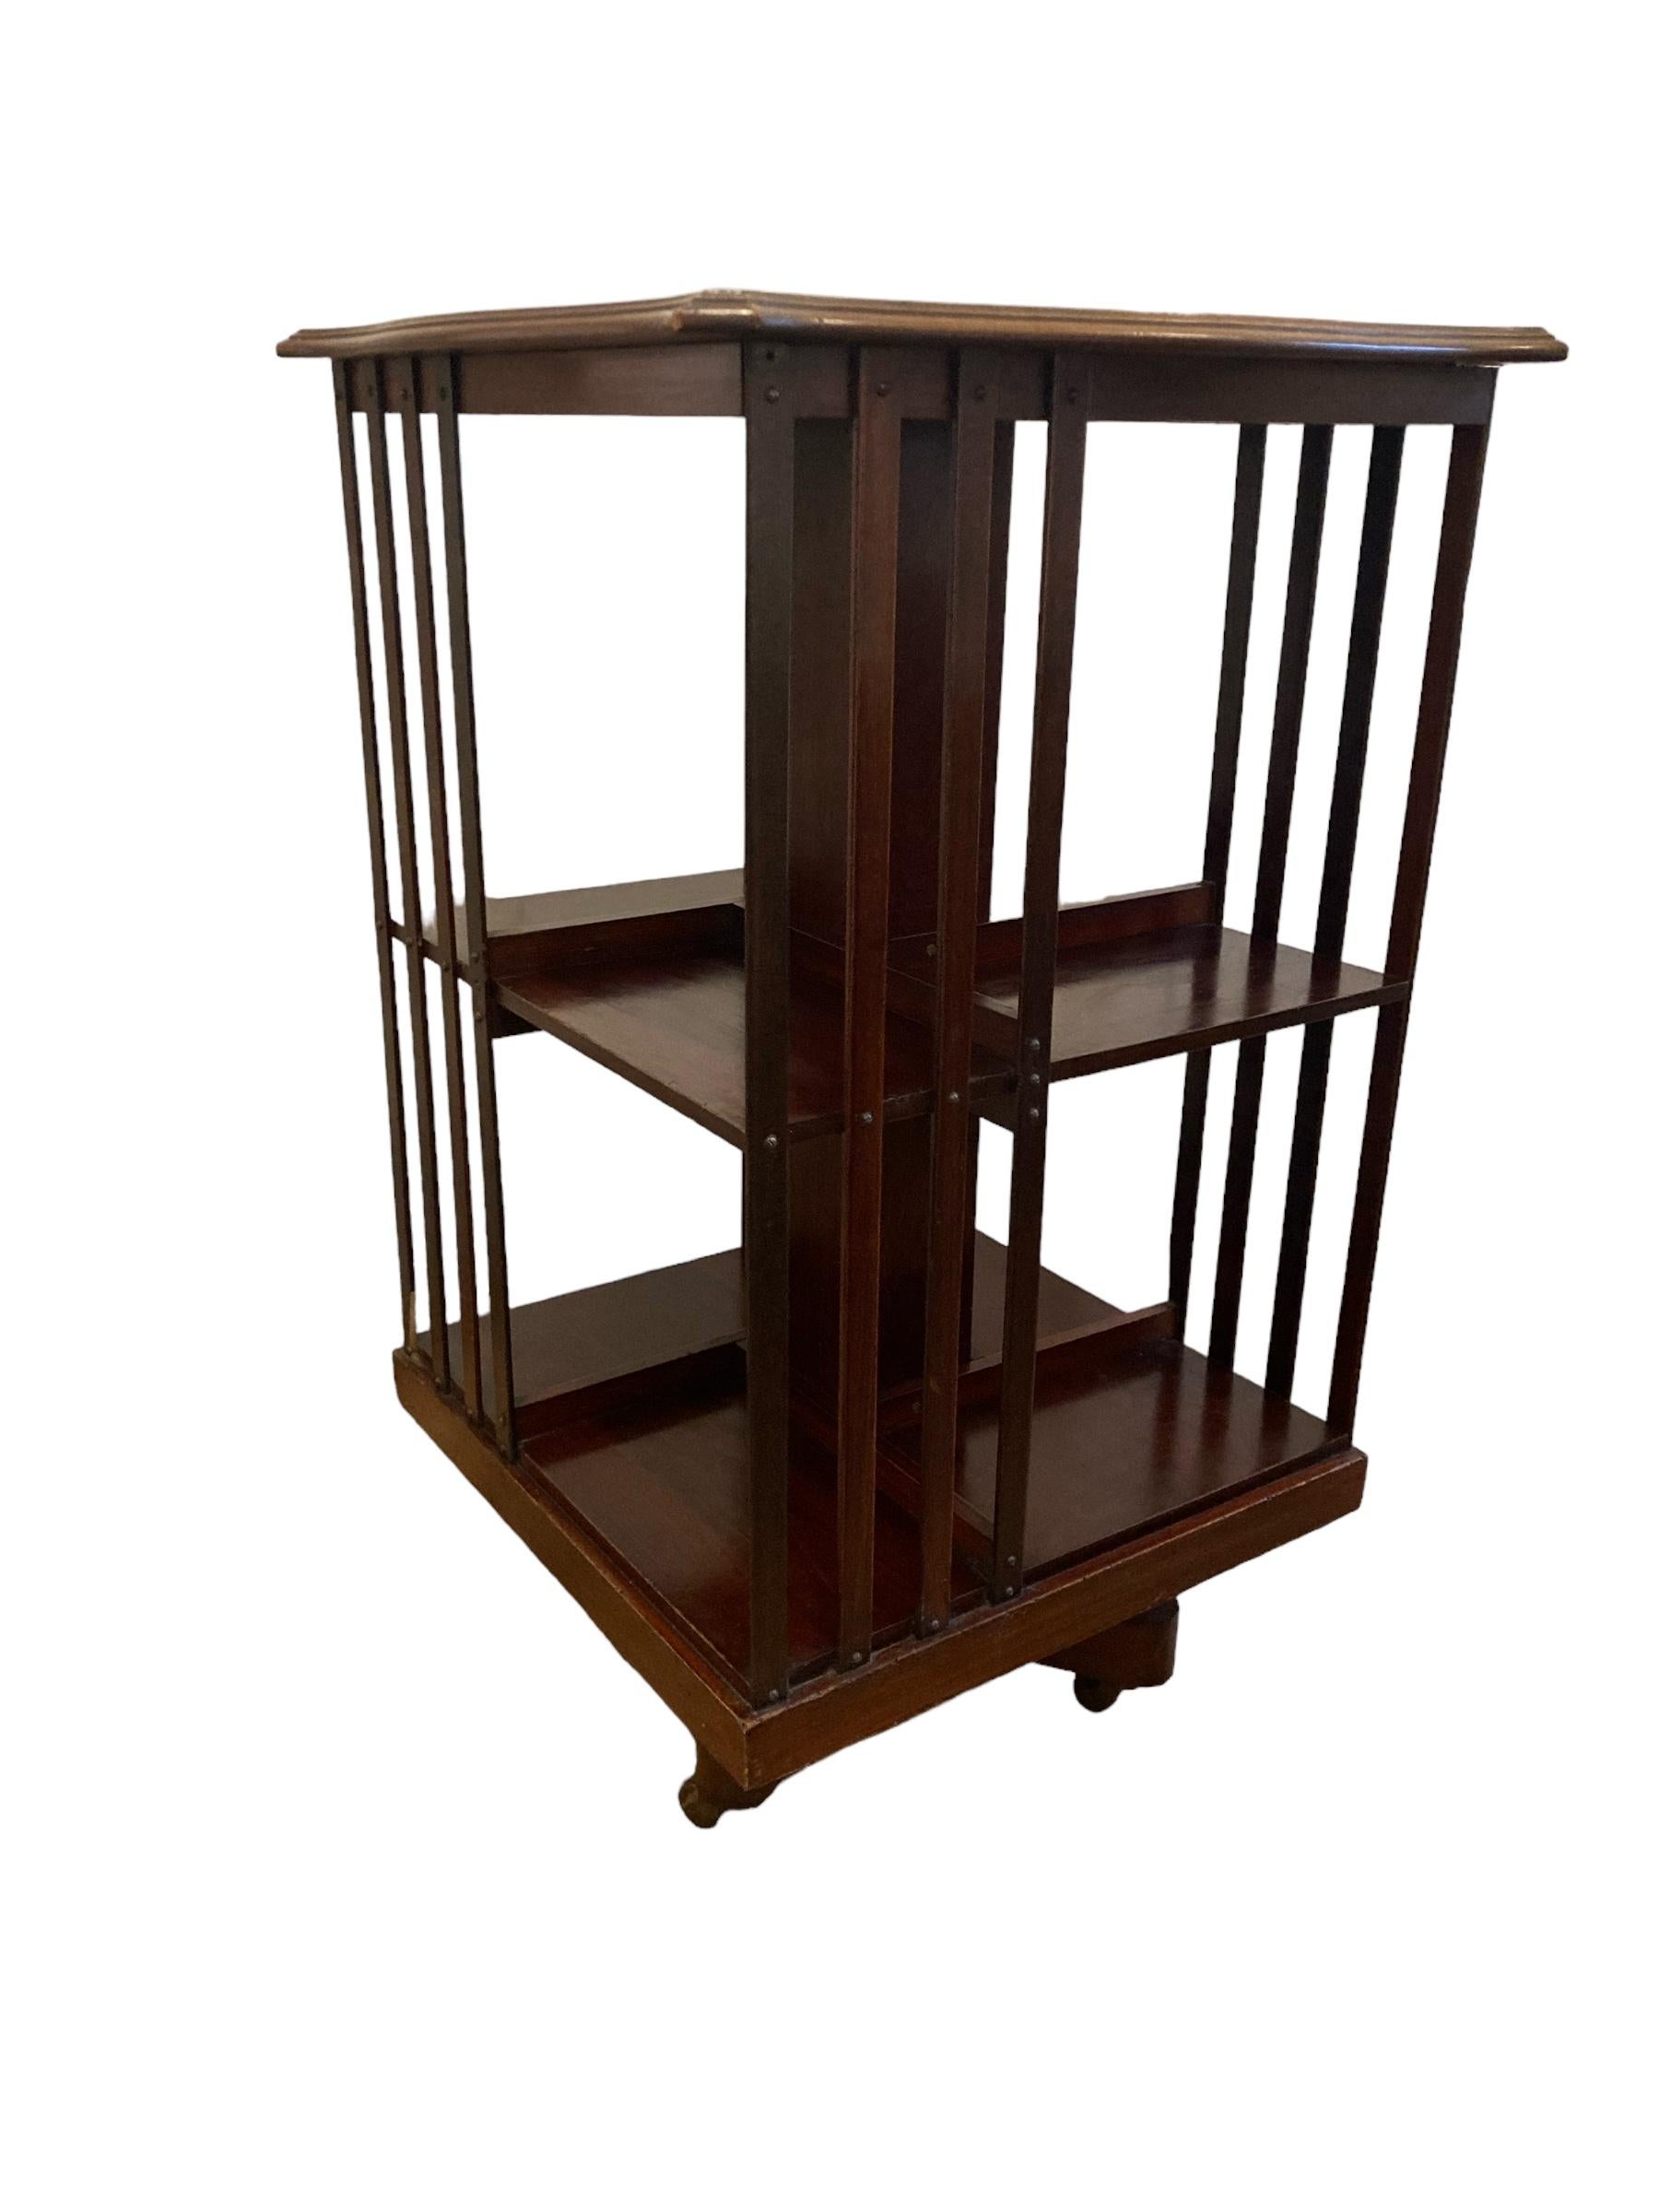 19th Century Edwardian Mahogany revolving Bookcase on casters and slatted supports.